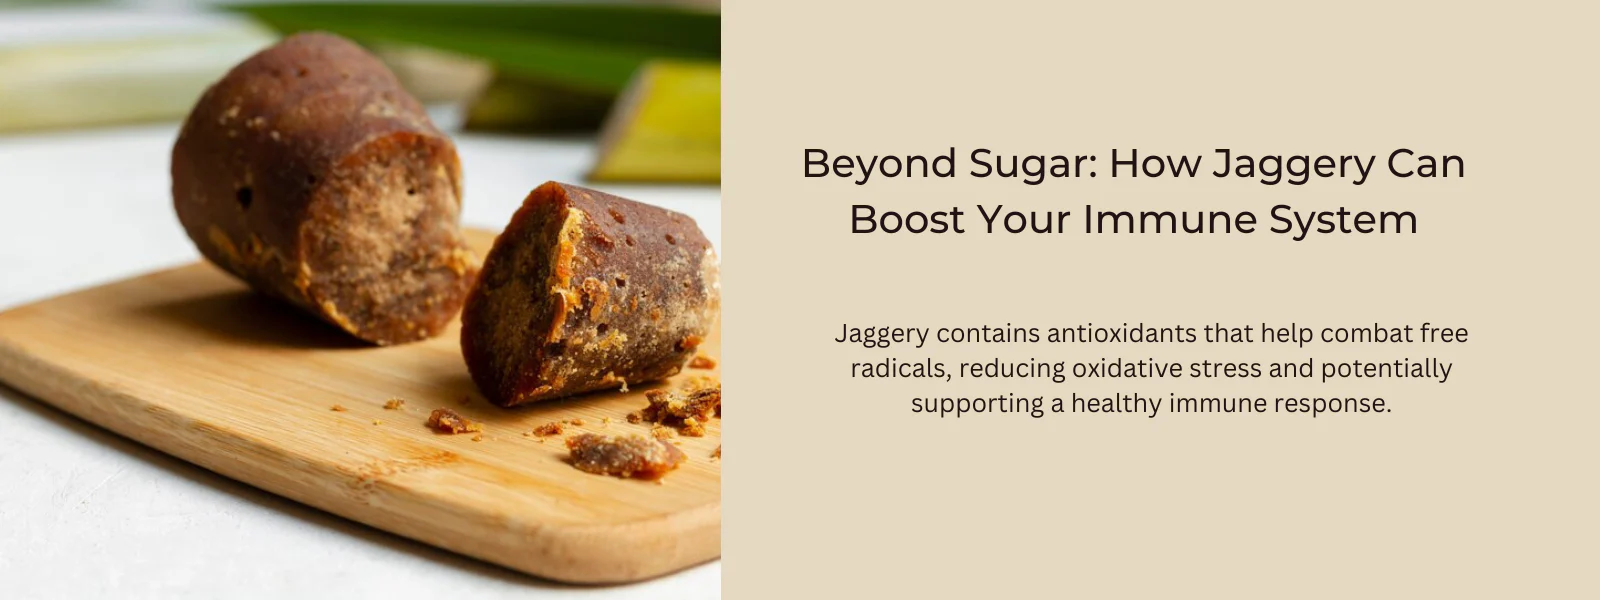 Immune Boosting Abilities of jaggery